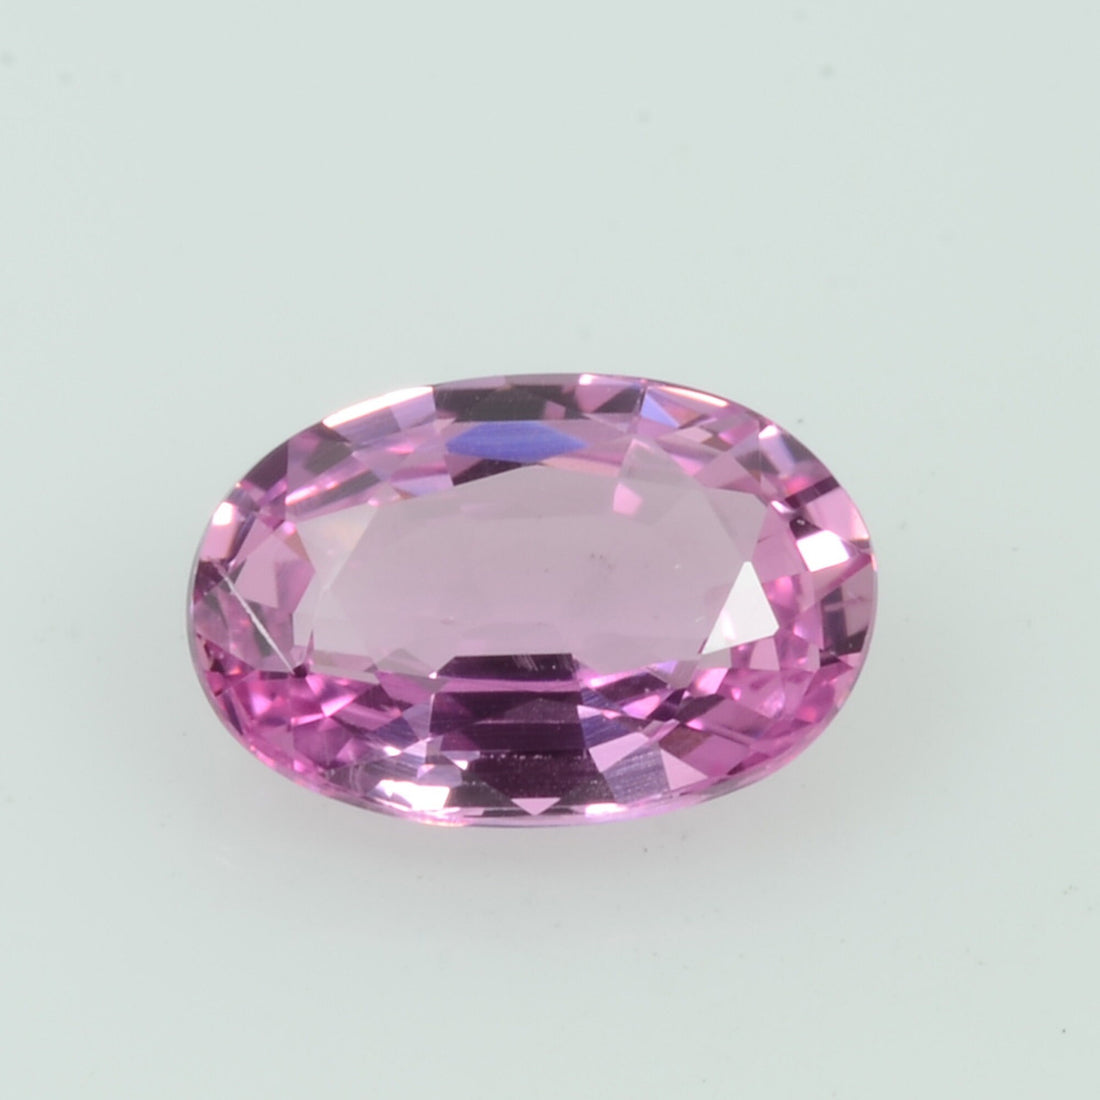 1.01 cts Natural  Pink Sapphire Loose Gemstone Oval Cut